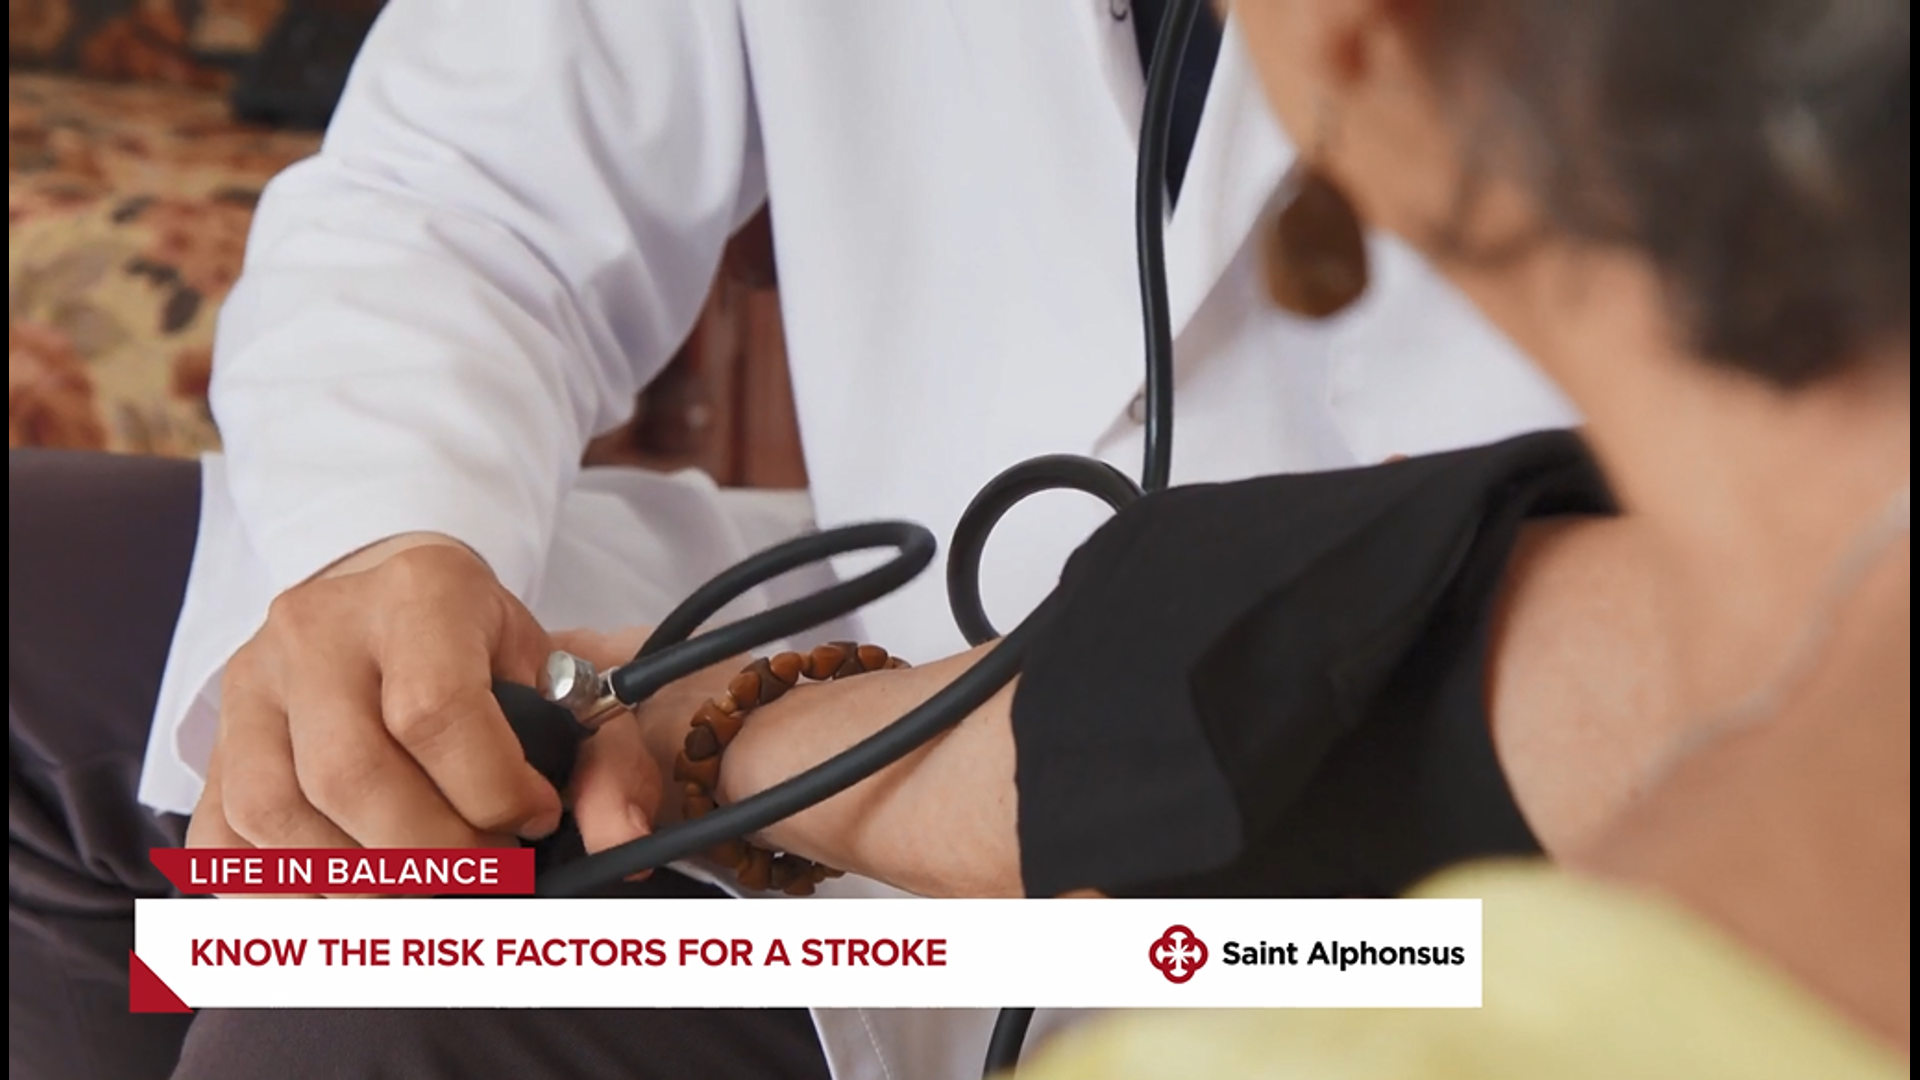 Dr. Lukas Clark, Vascular Neurologist with Saint Alphonsus explains what a stroke is, what symptoms to look for, and how to prevent one from happening.